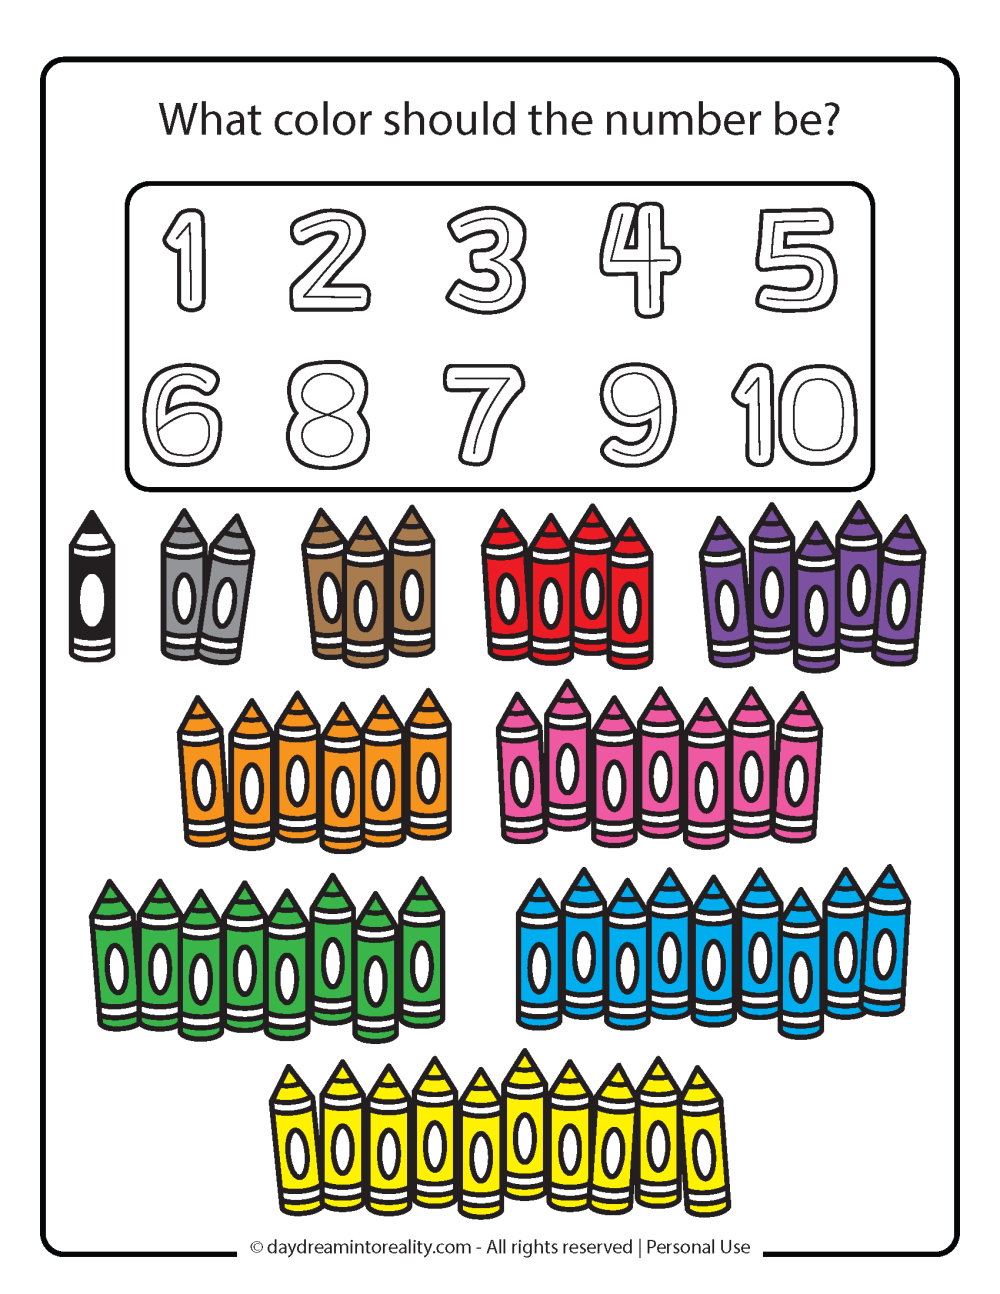 numbers 1 - 10 counting, color and number recognition worksheet free printable.